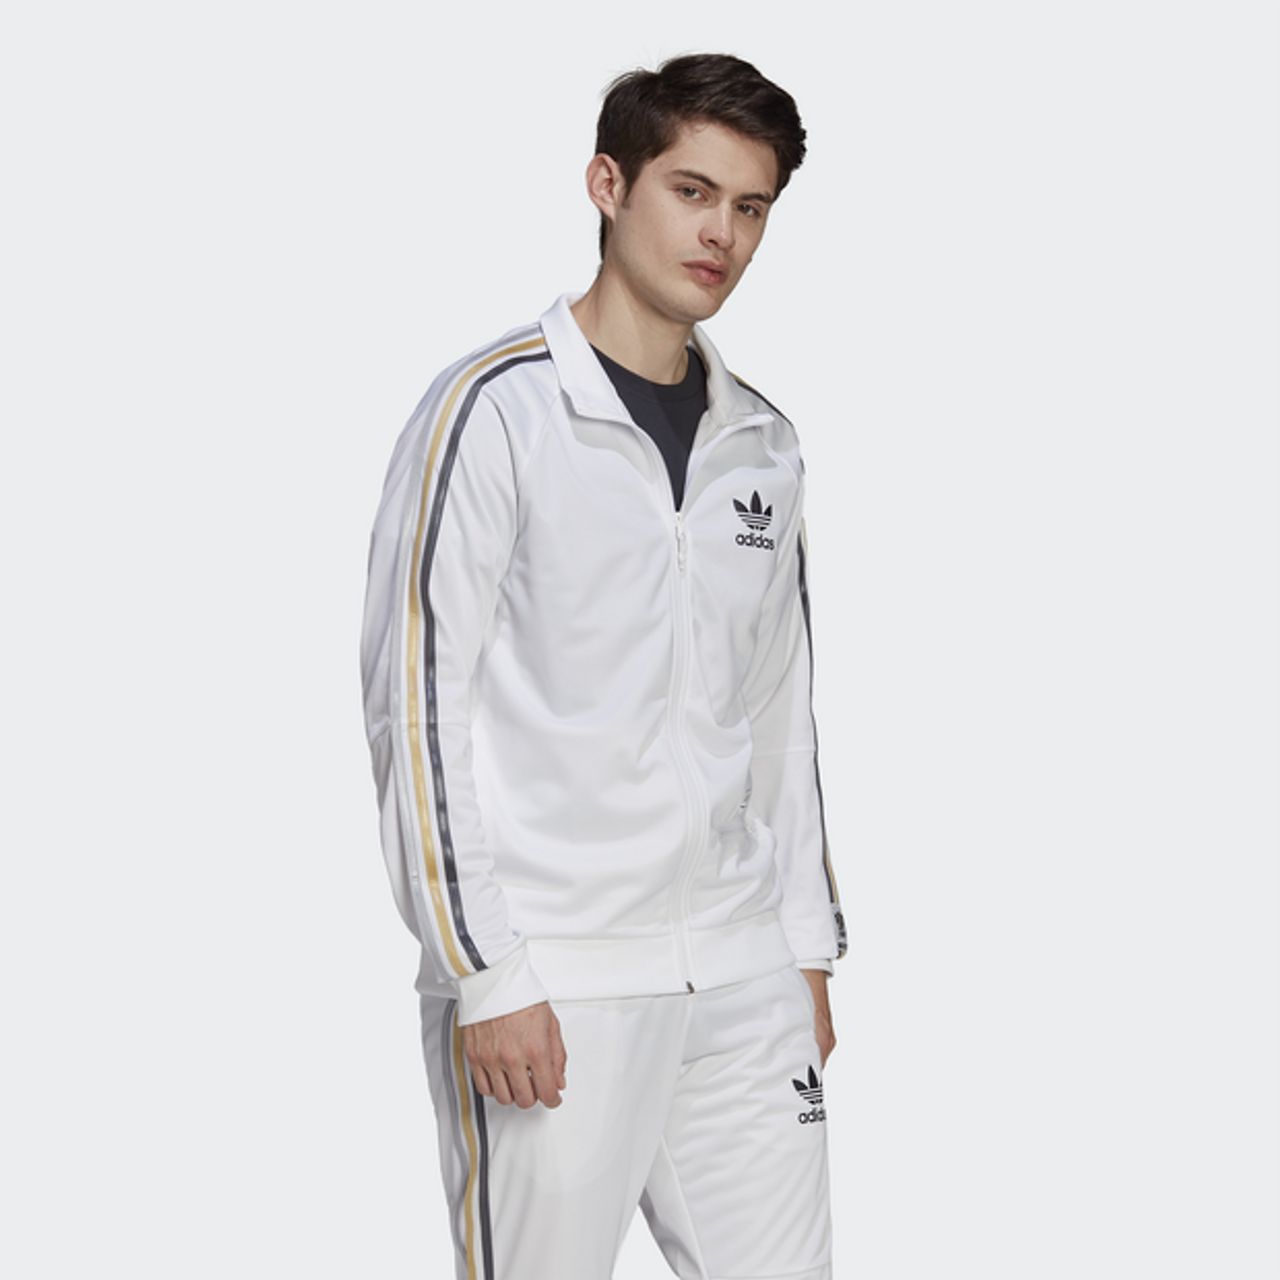 Adidas Chile20 Track Top - Men Track Tops HD8292 - Compare prices